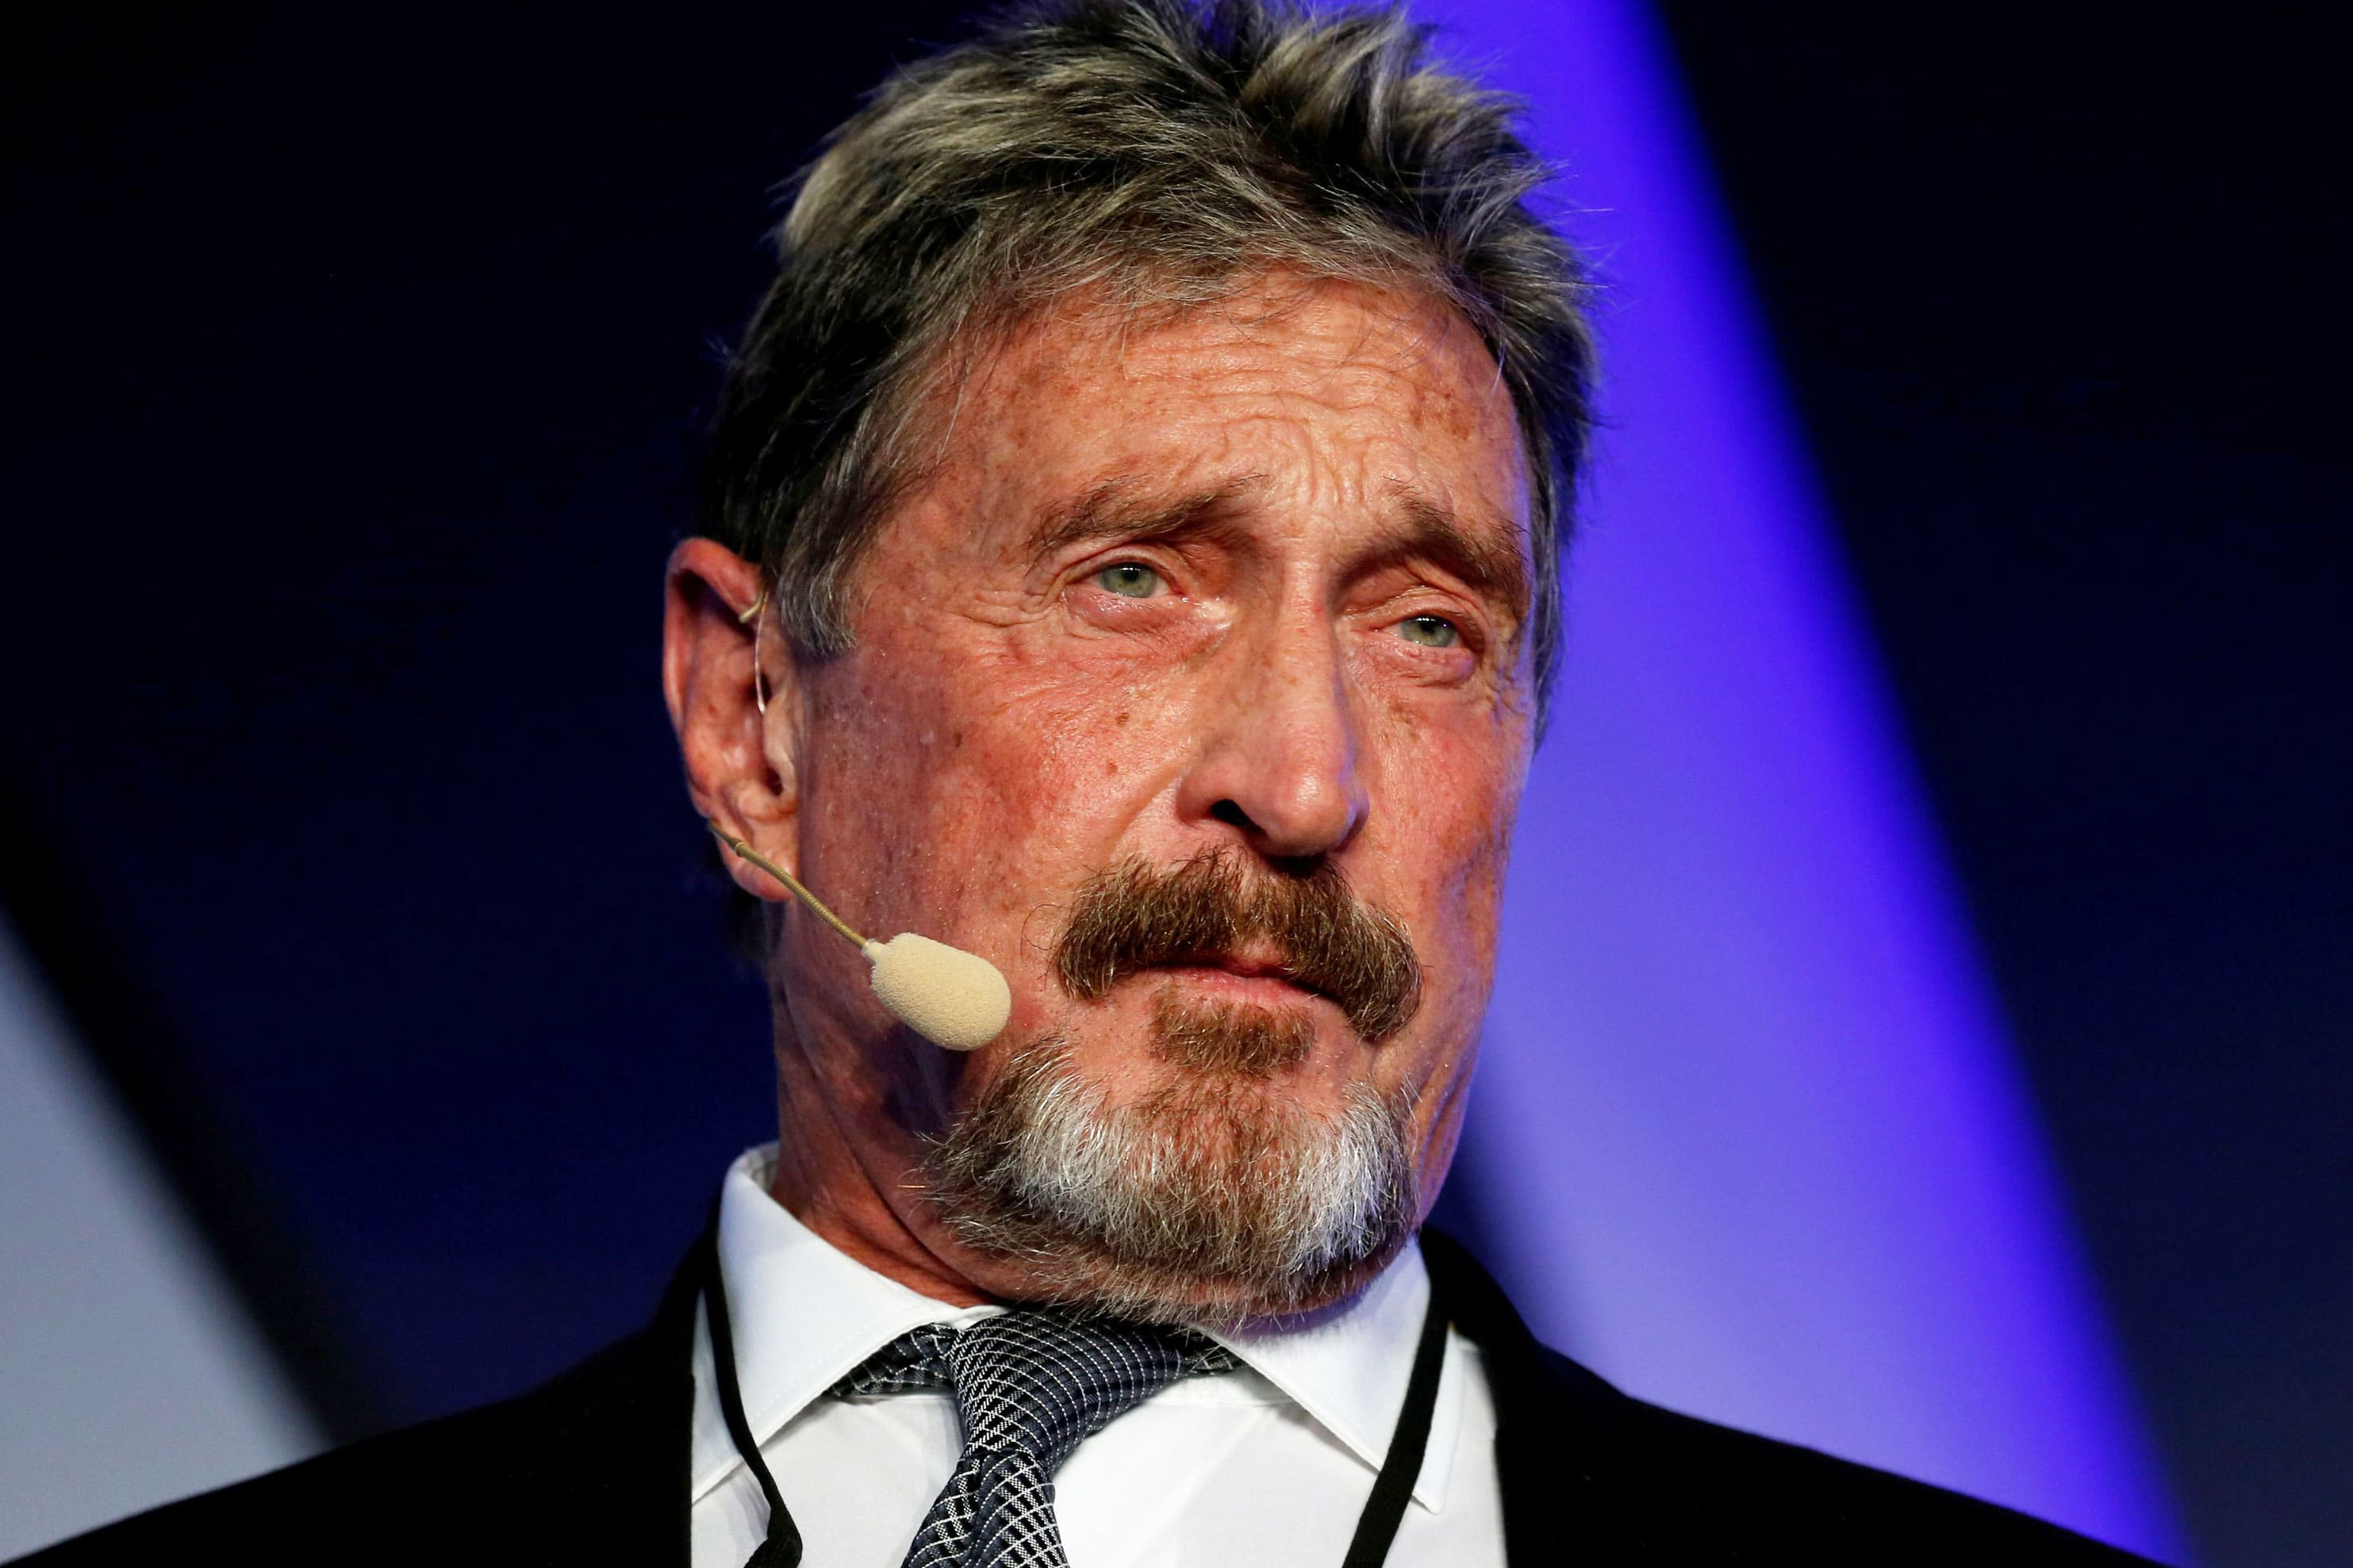 John McAfee dead of apparent suicide in Spanish jail after court approves his extradition to U.S. on tax charges